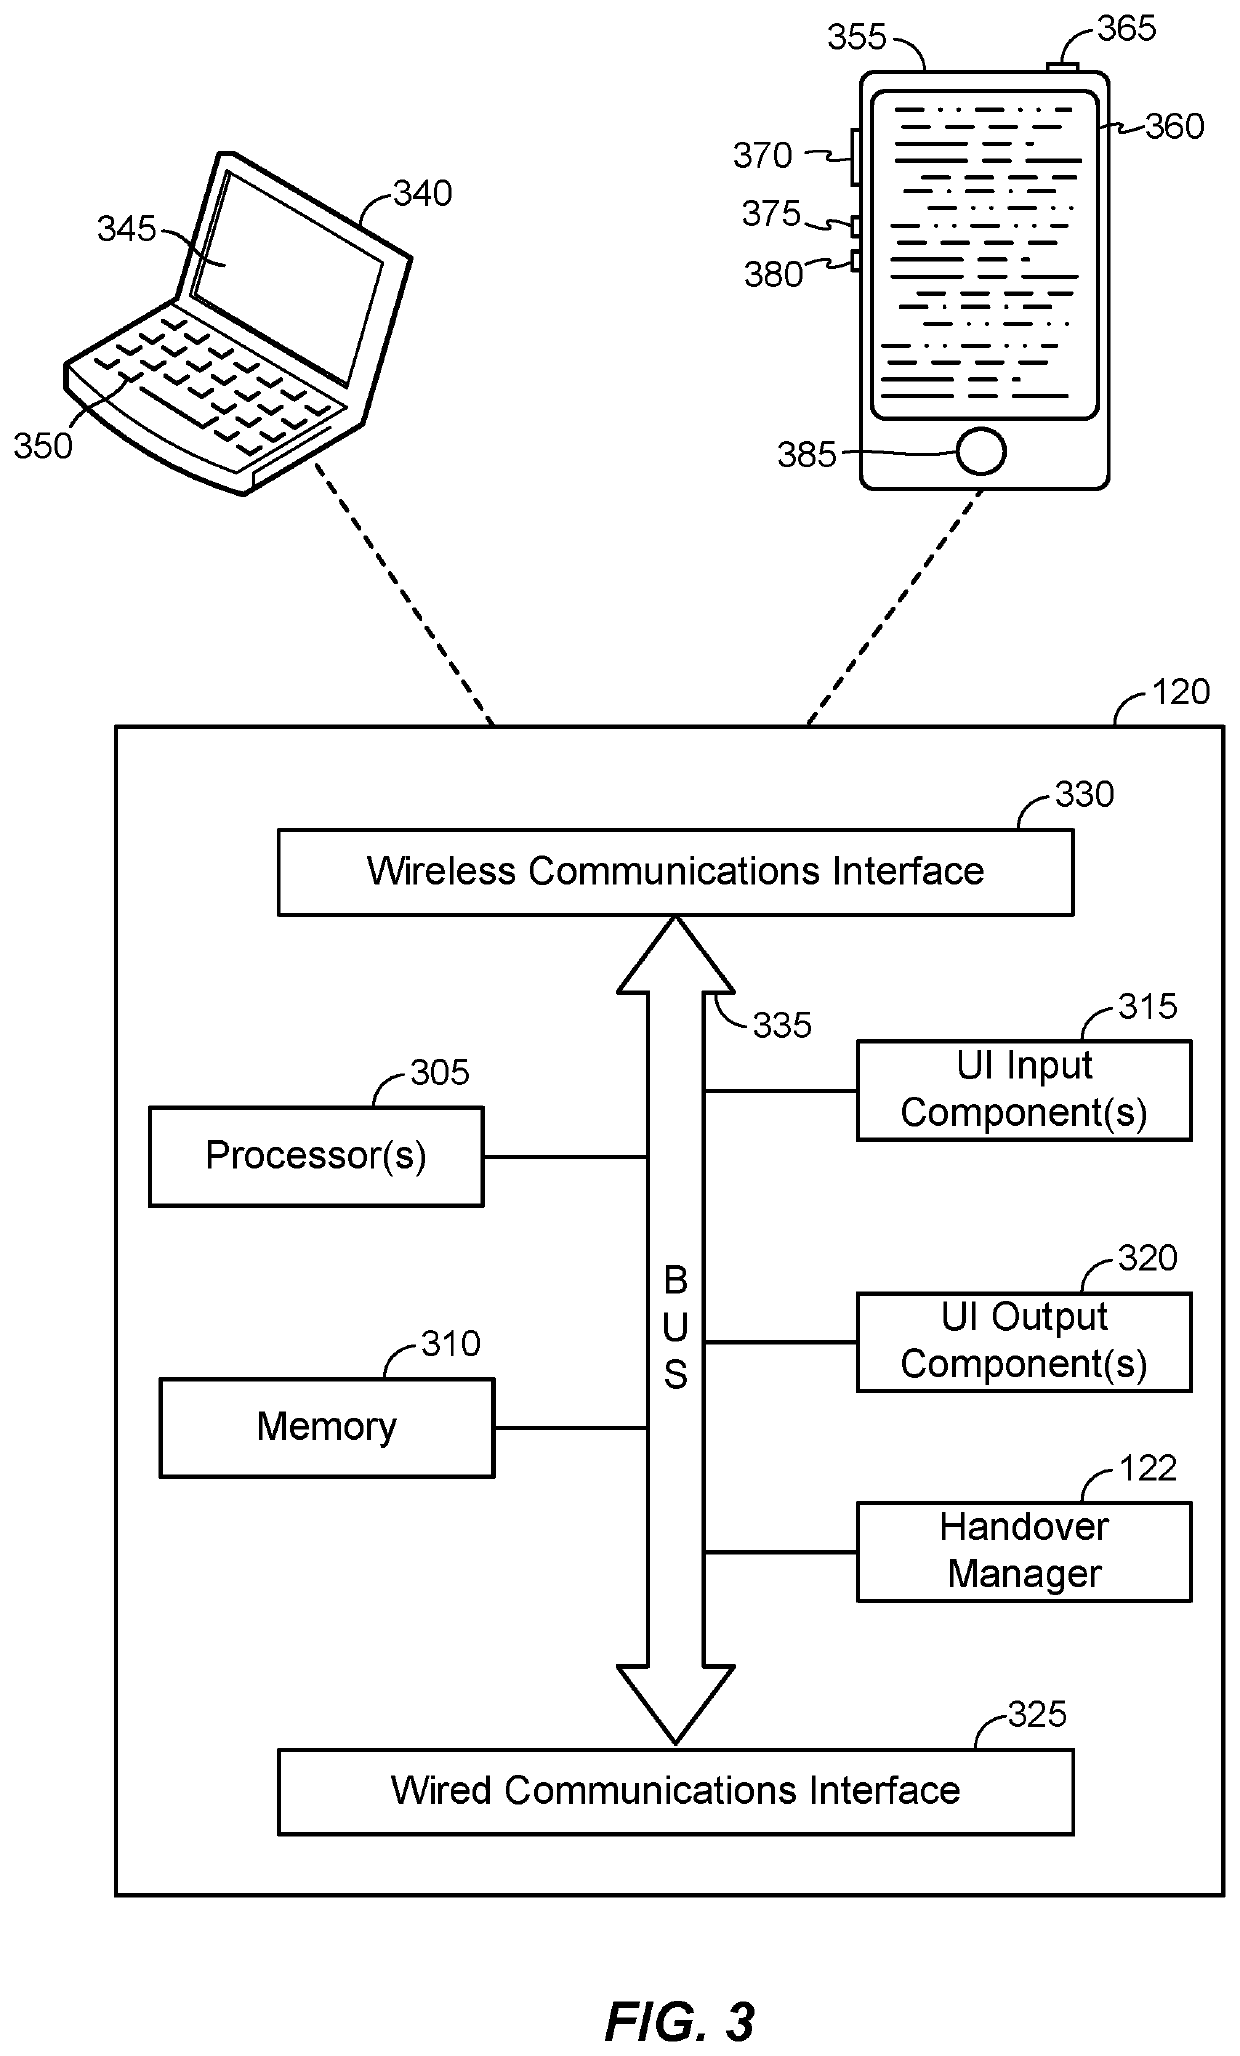 Positioning enhancements for narrowband mobile devices